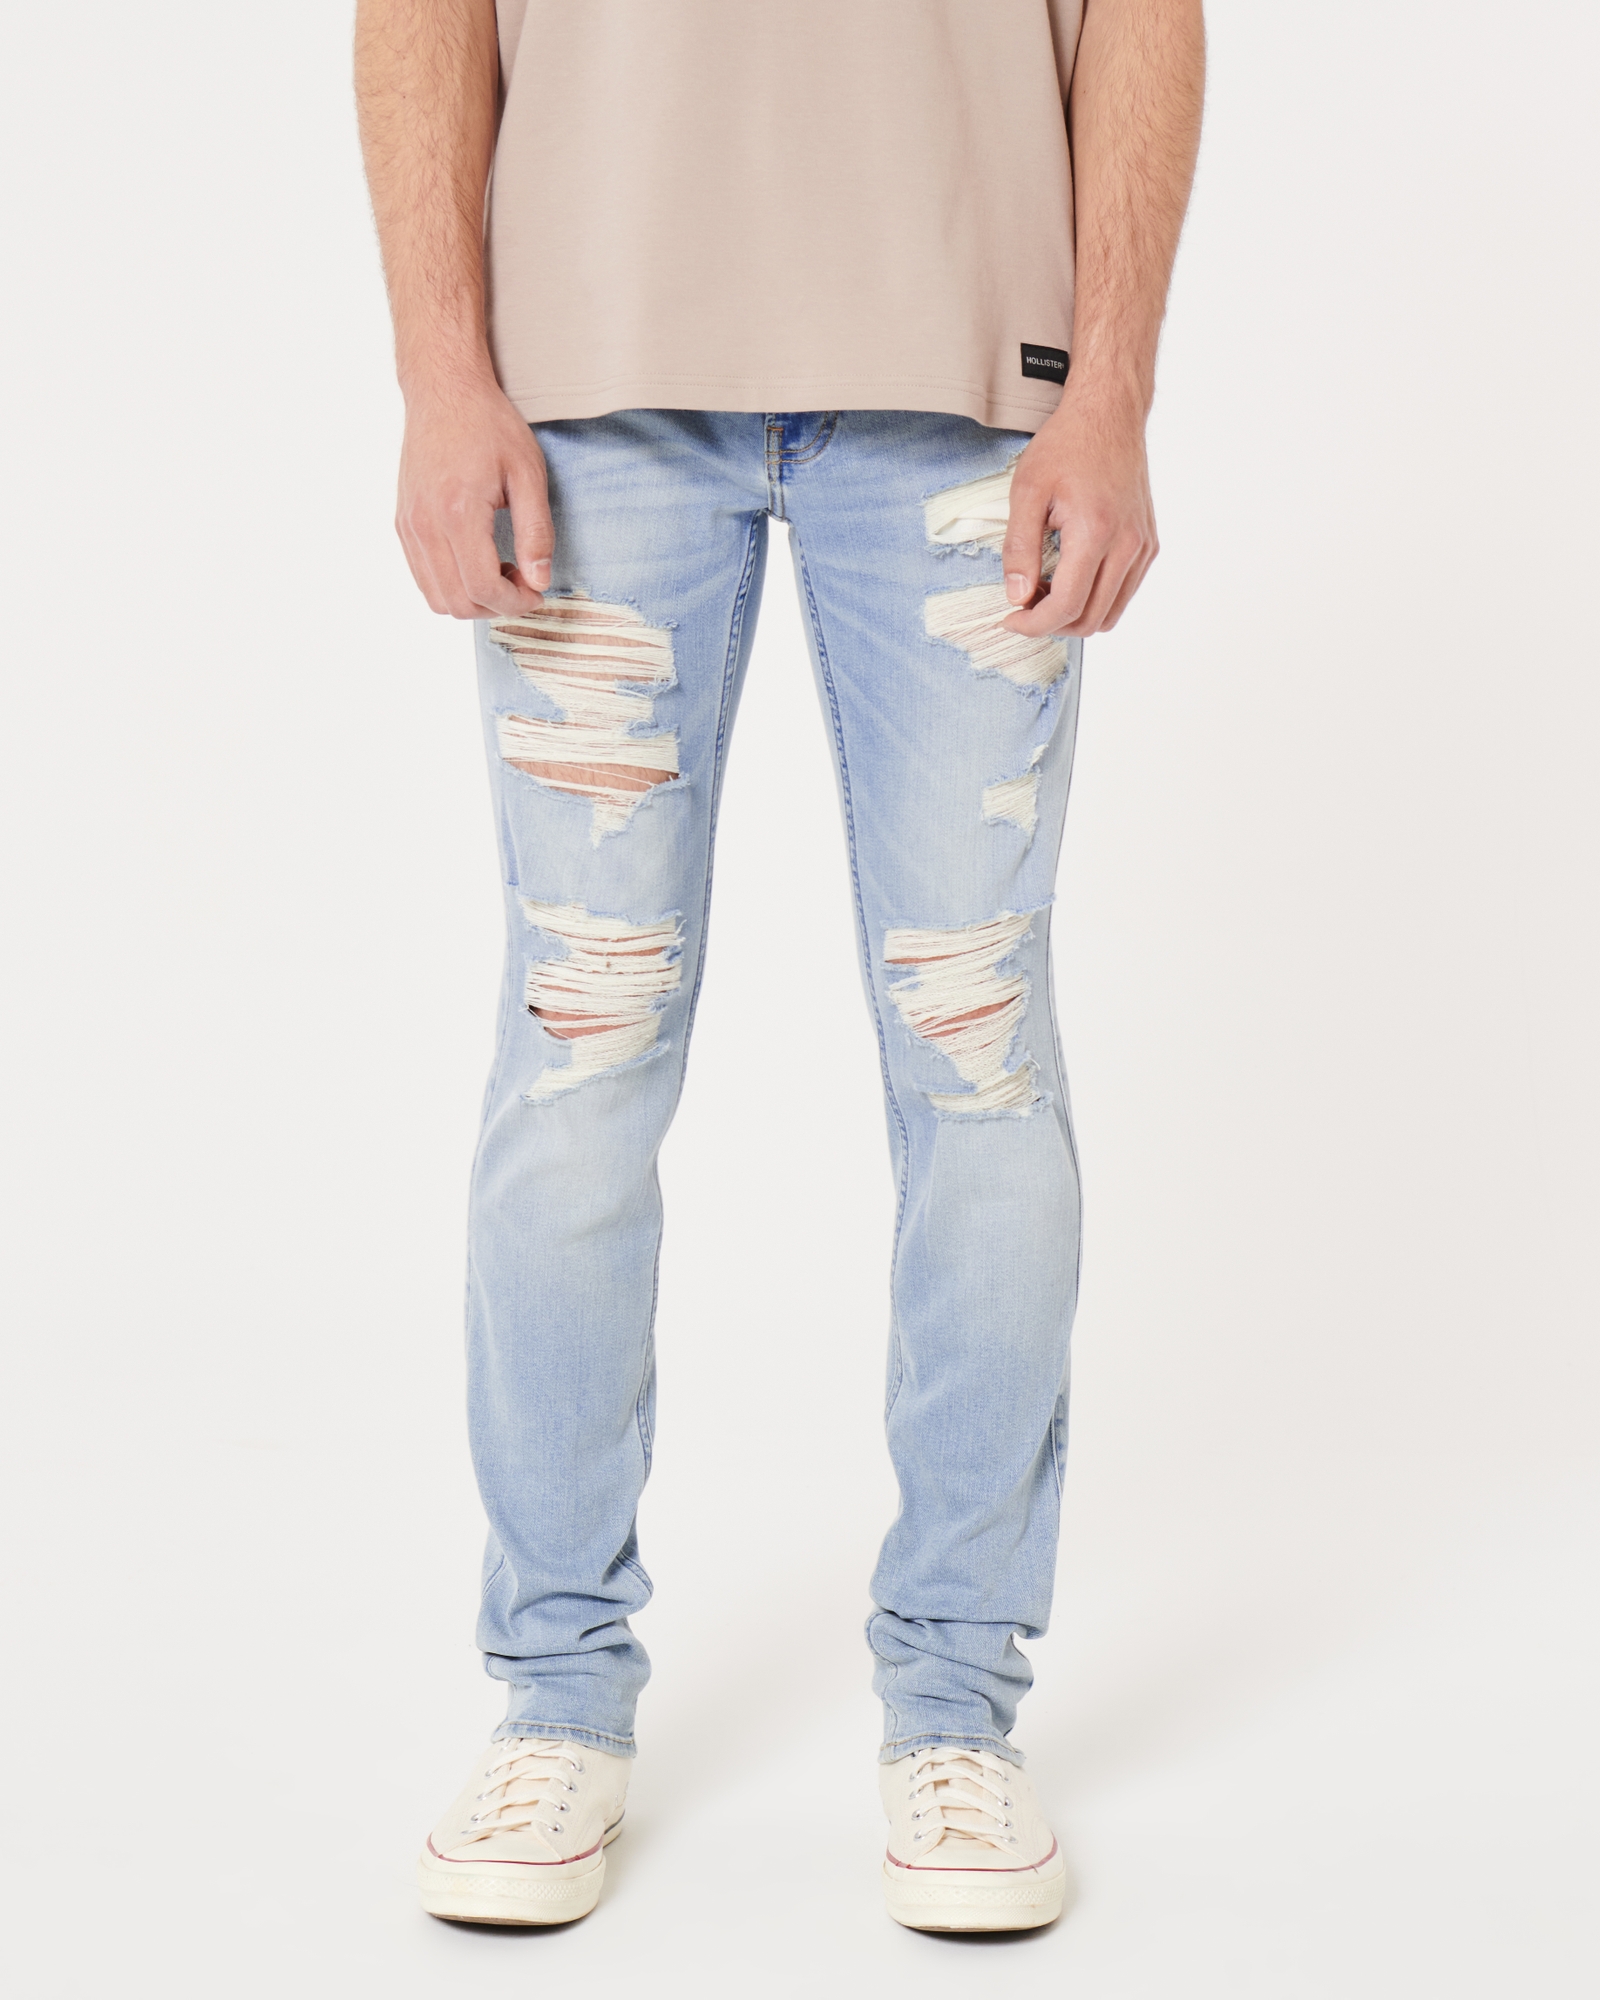 Men's Light Wash Stacked Skinny Jeans, Men's Clearance